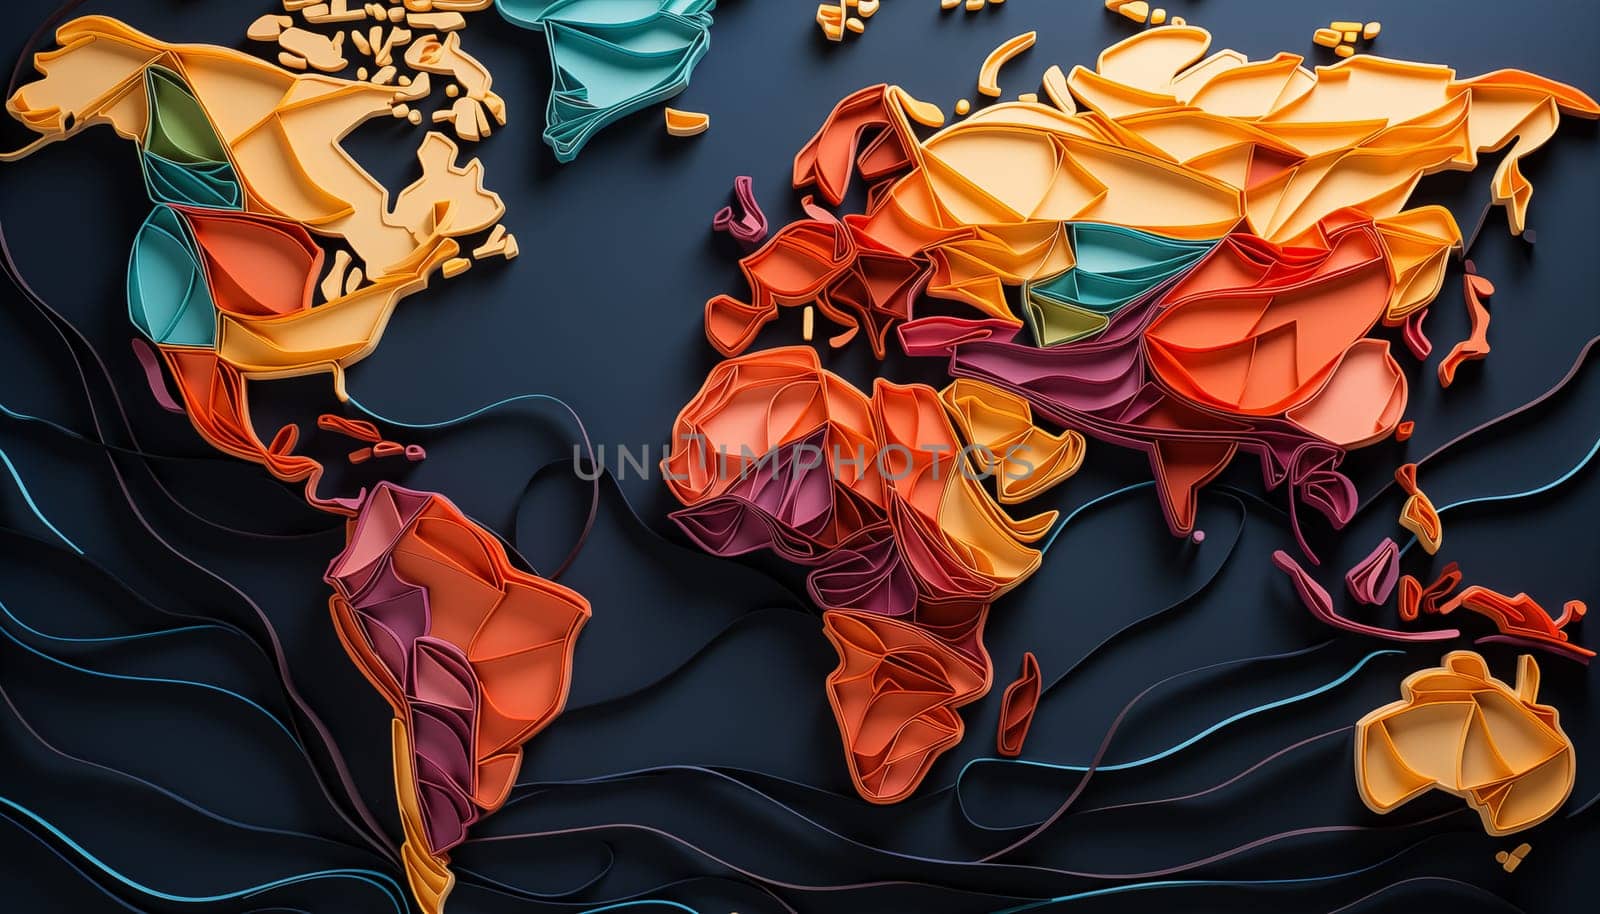 World map - abstract background by Nadtochiy